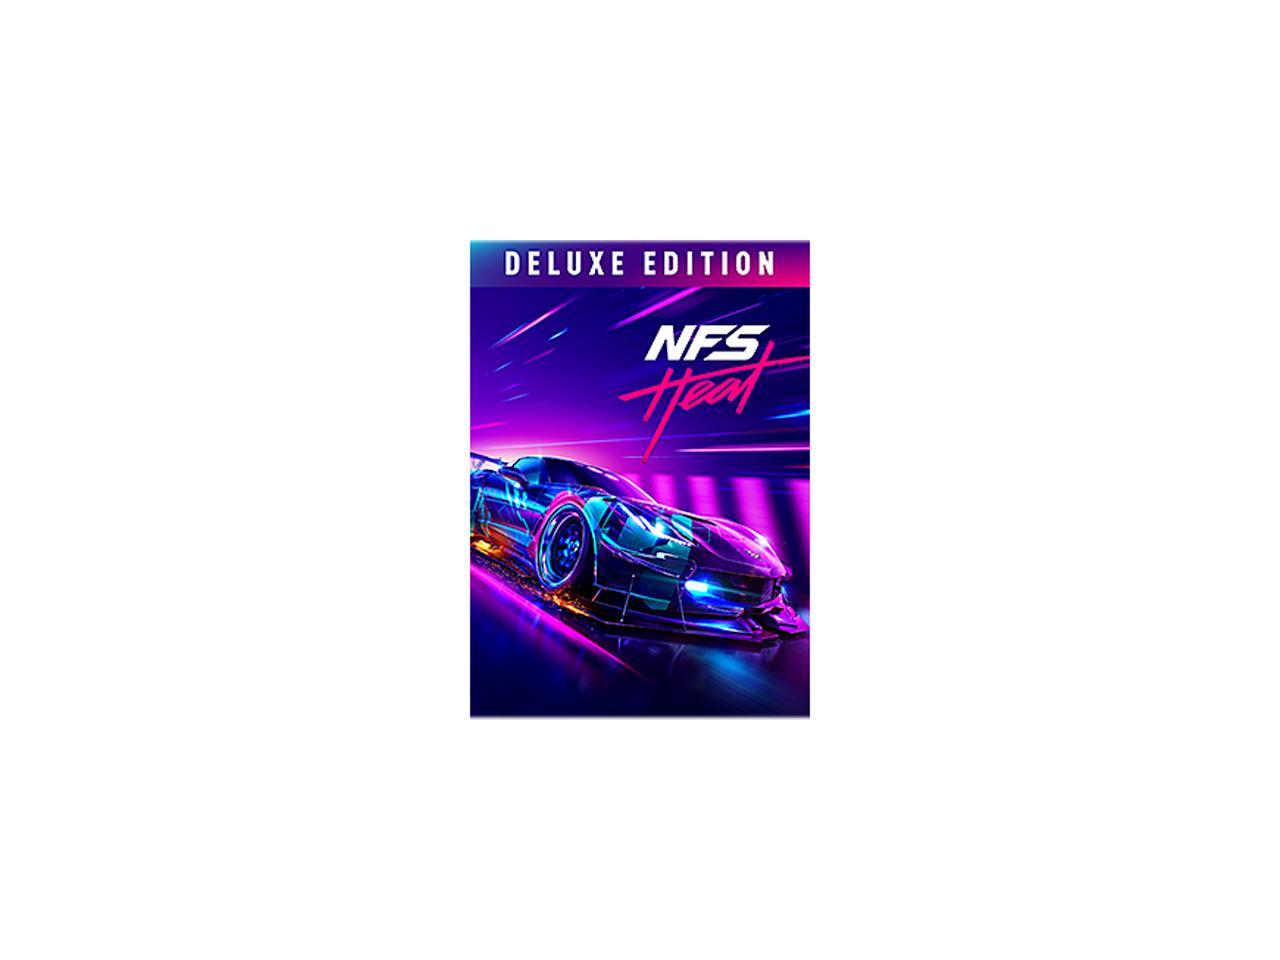 need for speed 2015 pc deluxe edition discount